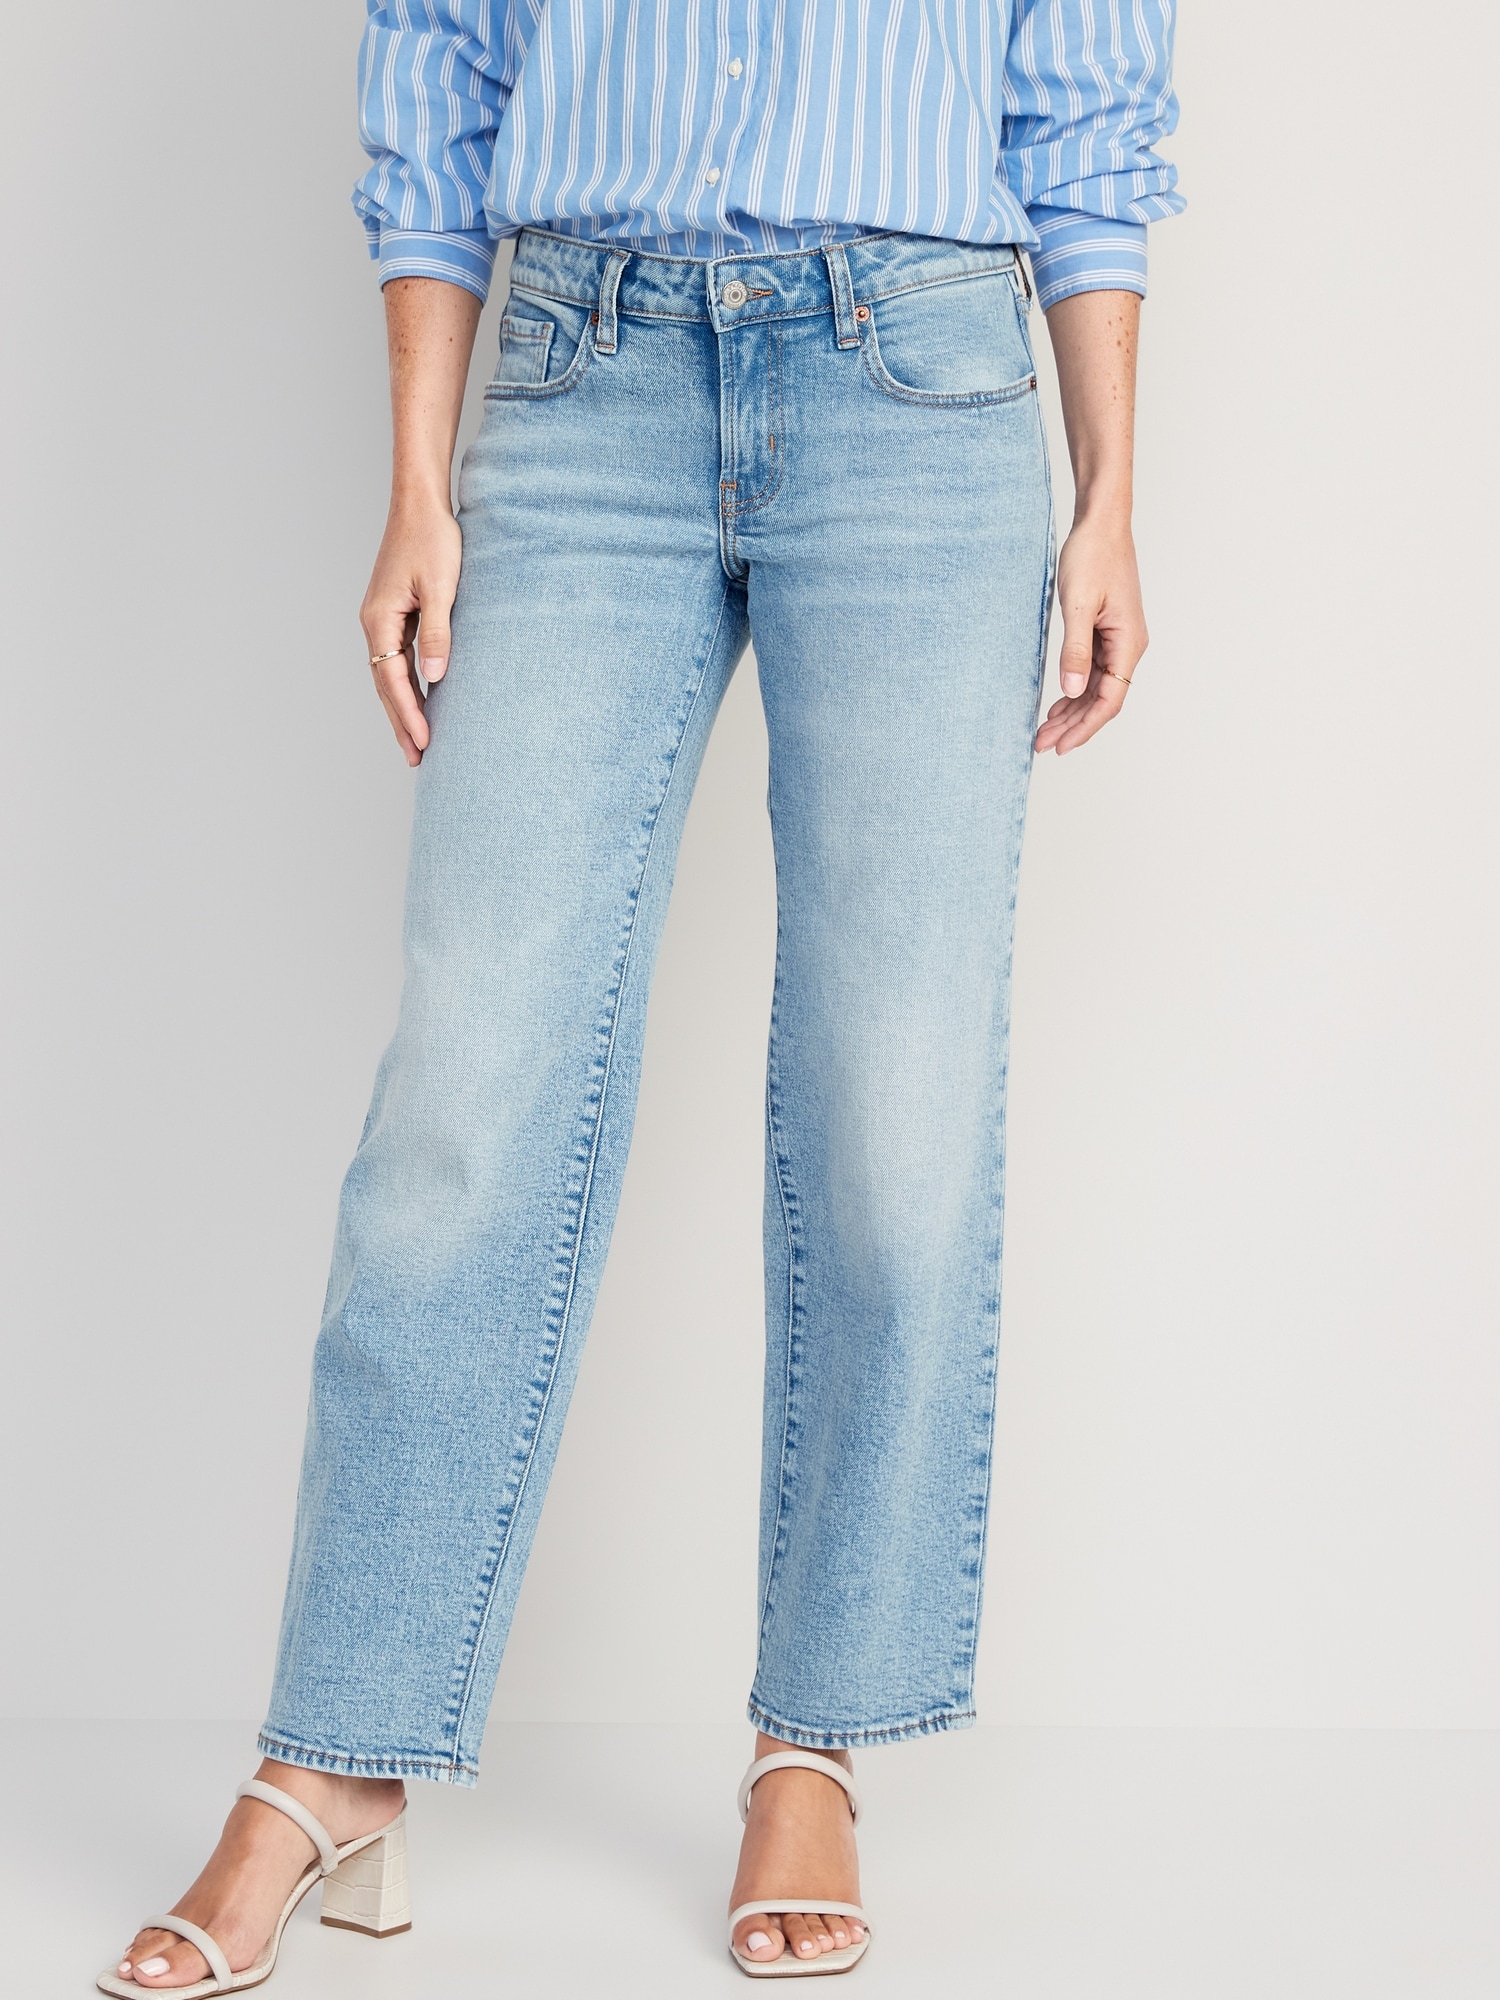 Low-Rise O.G. Loose Jeans for Women